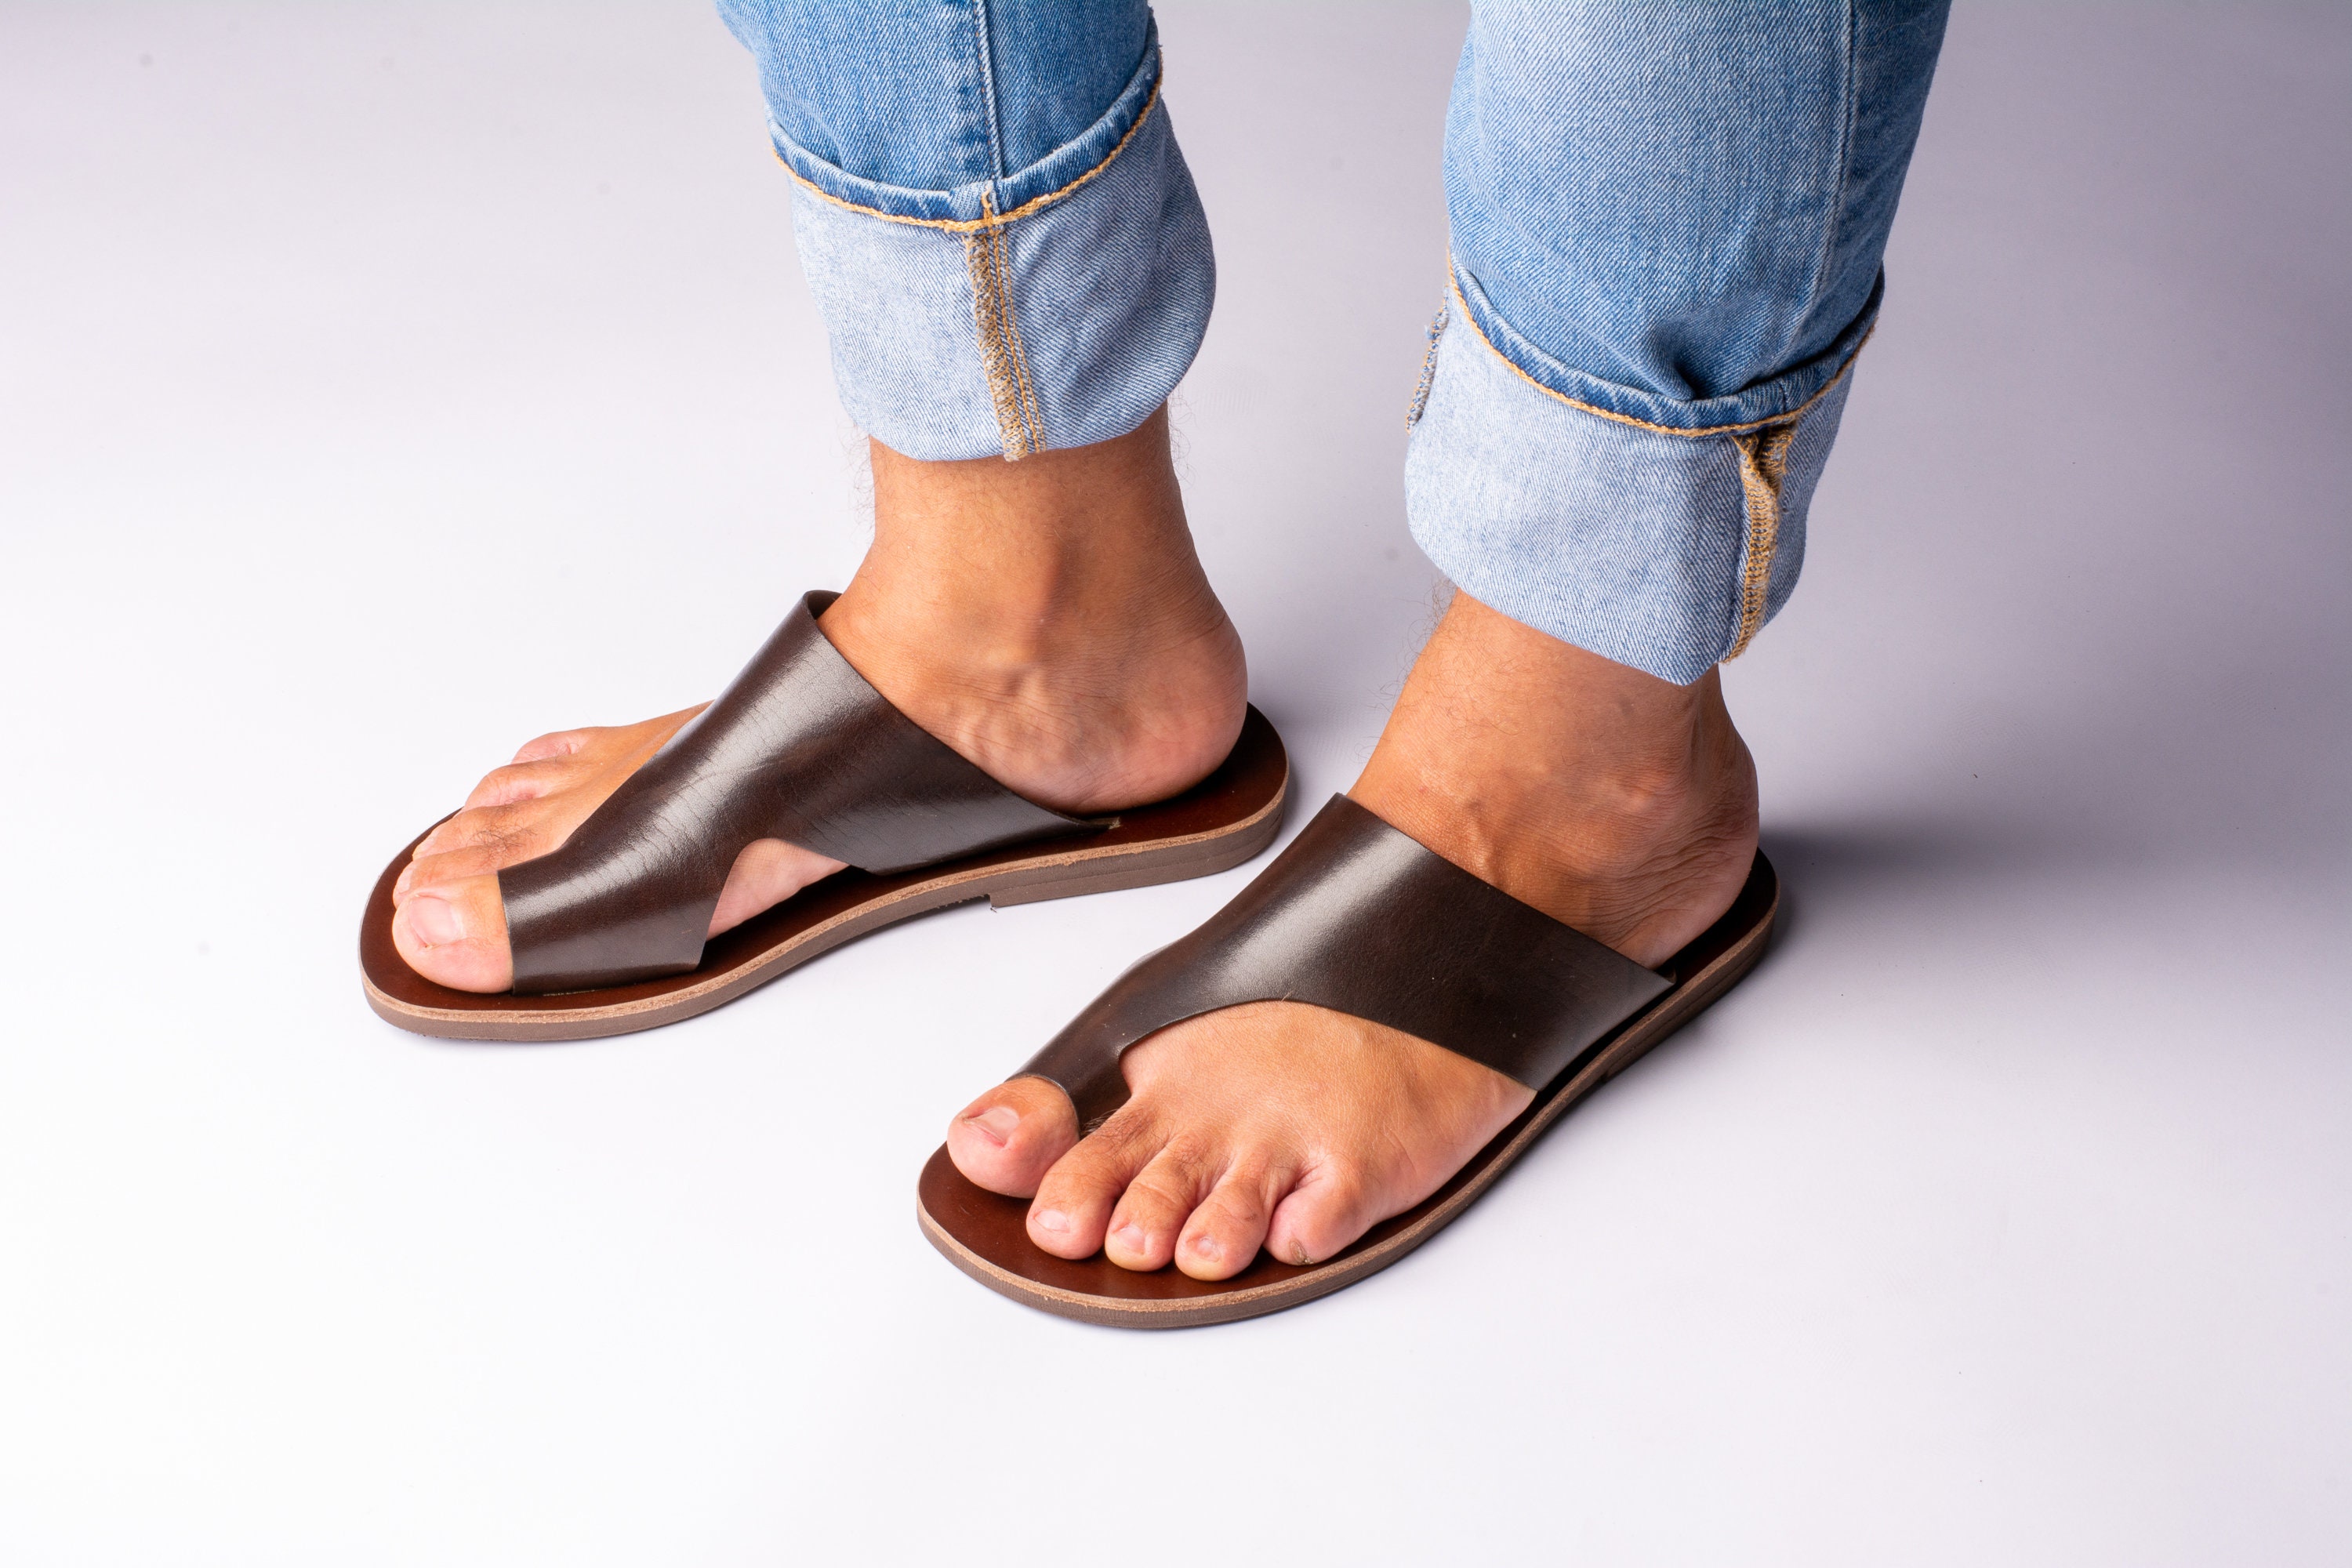 Buy Mens Leather Sandals, Toe Ring Sandals, Greek Sandals, Mens Sandals,  Beach Sandals, Gift for Him, Made From Genuine Leather in Greece. Online in  India - Etsy